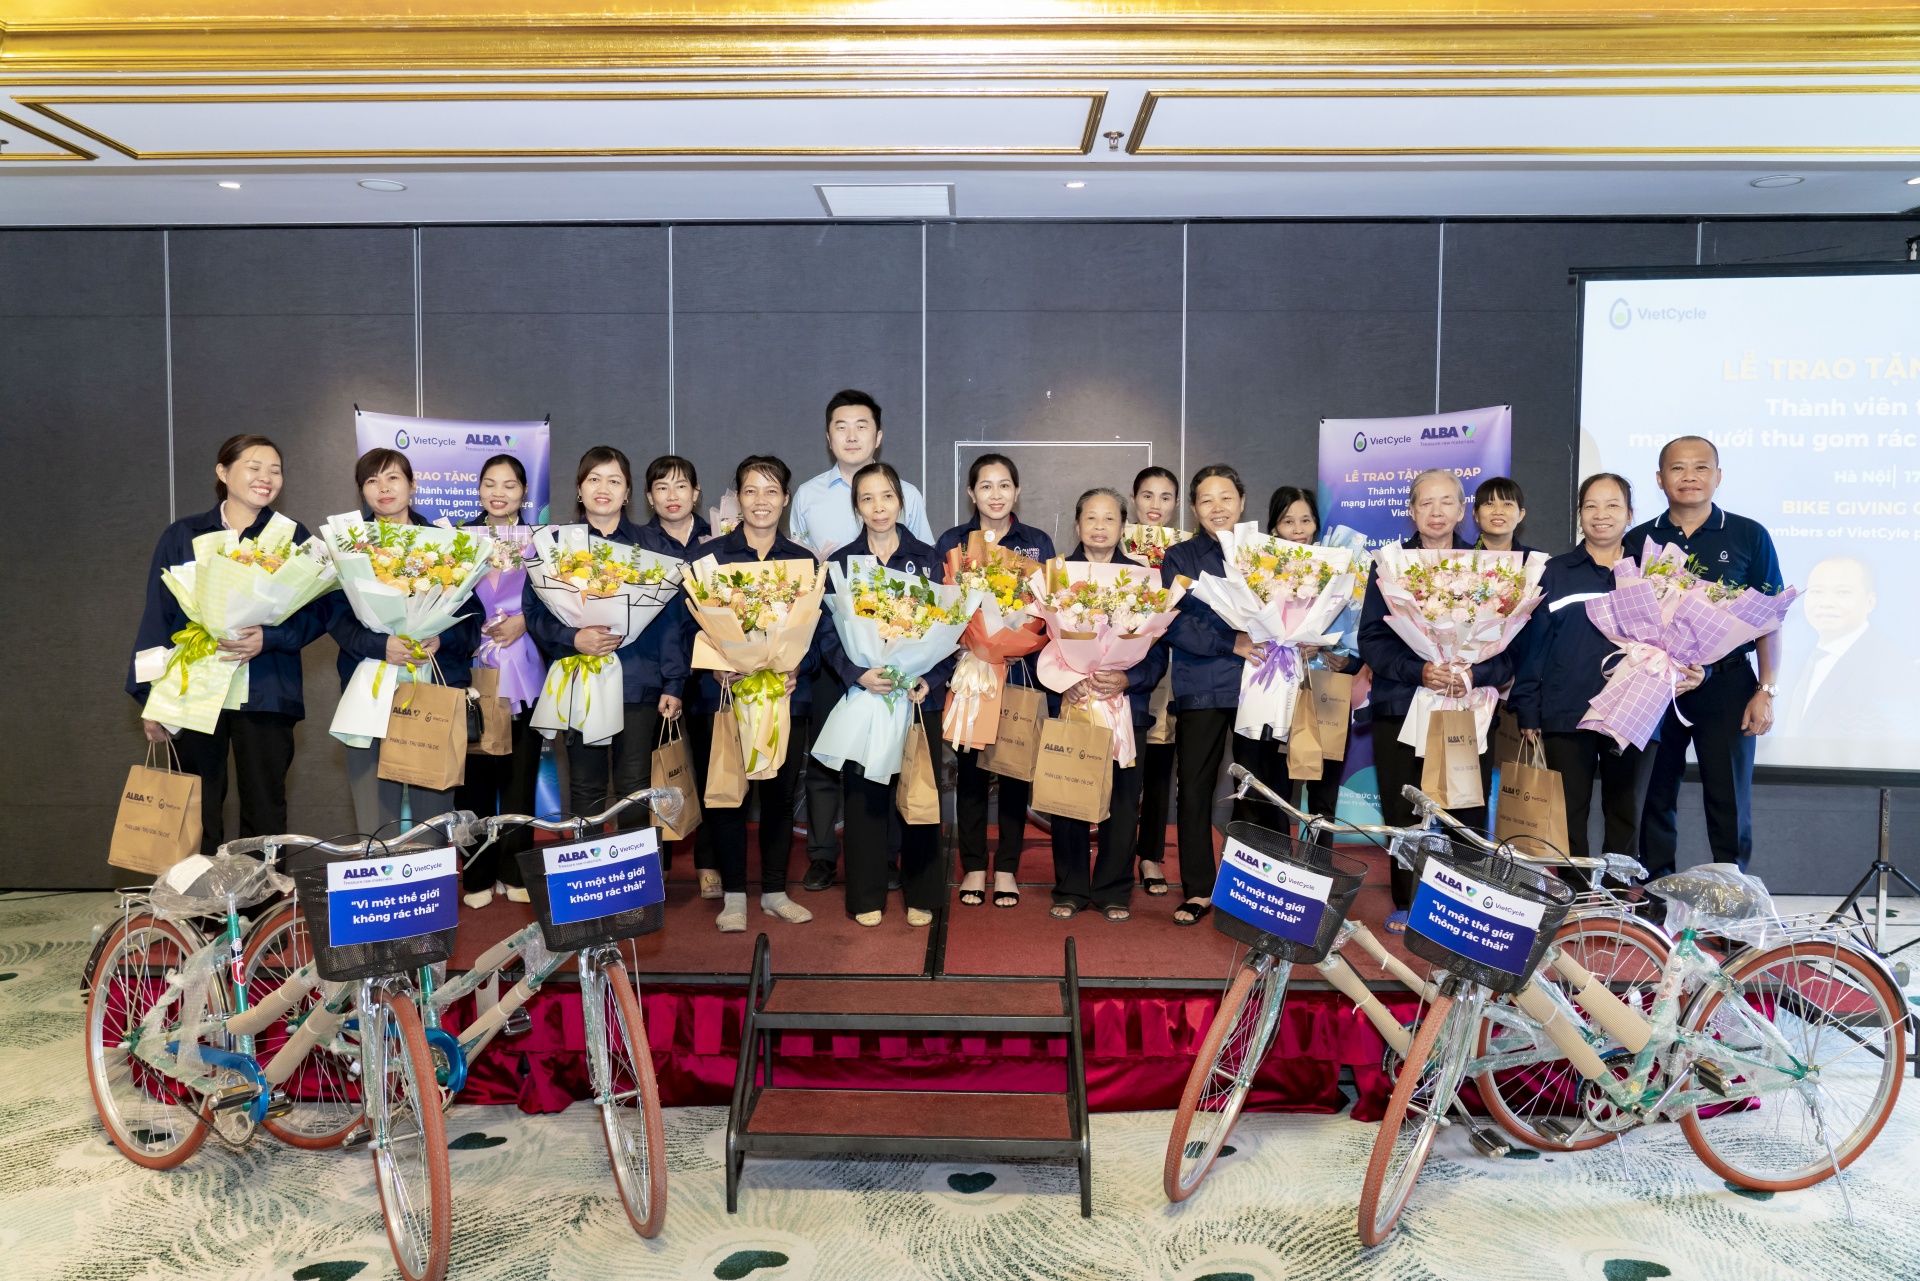 ALBA Group Asia and VietCycle present bicycles to plastic waste collection network